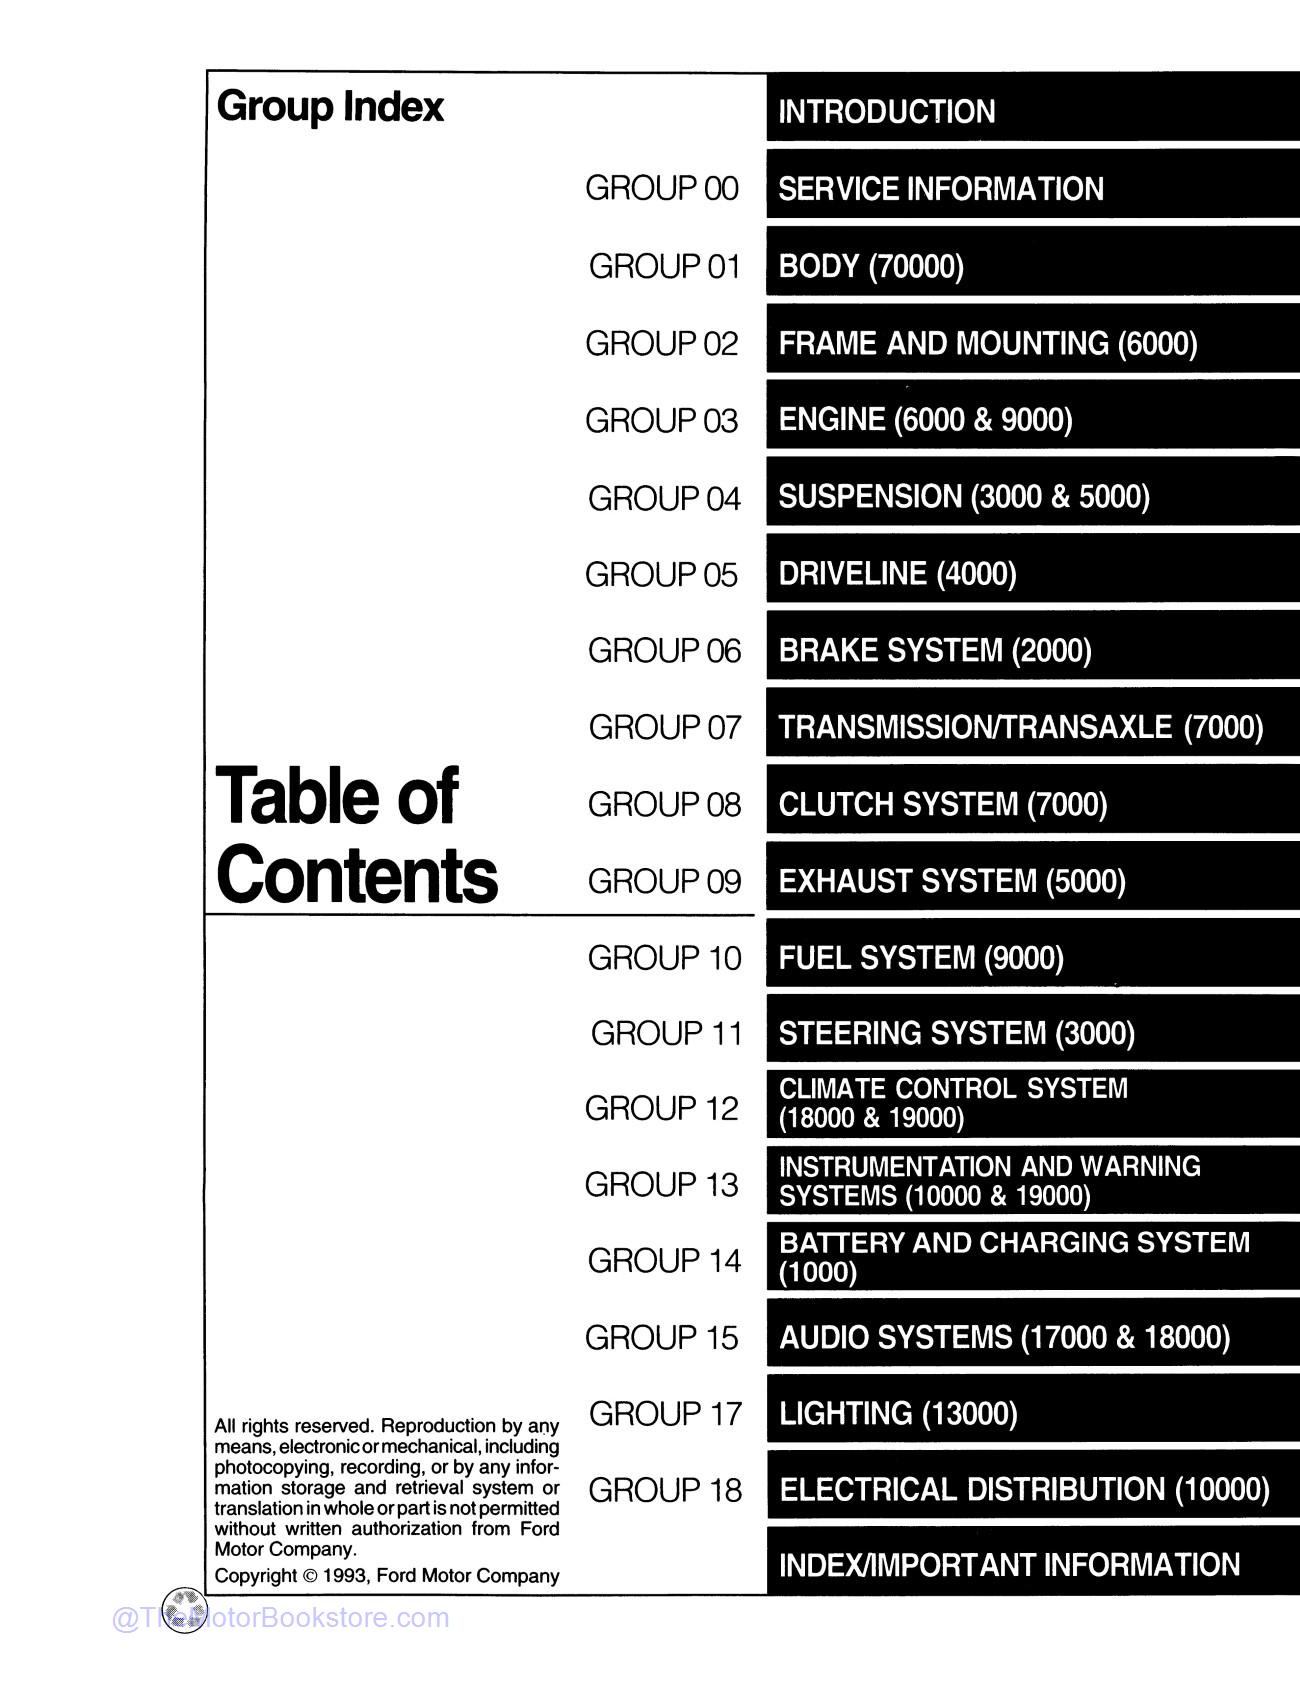 1994 Ford Mustang Service Manual  - Table of Contents